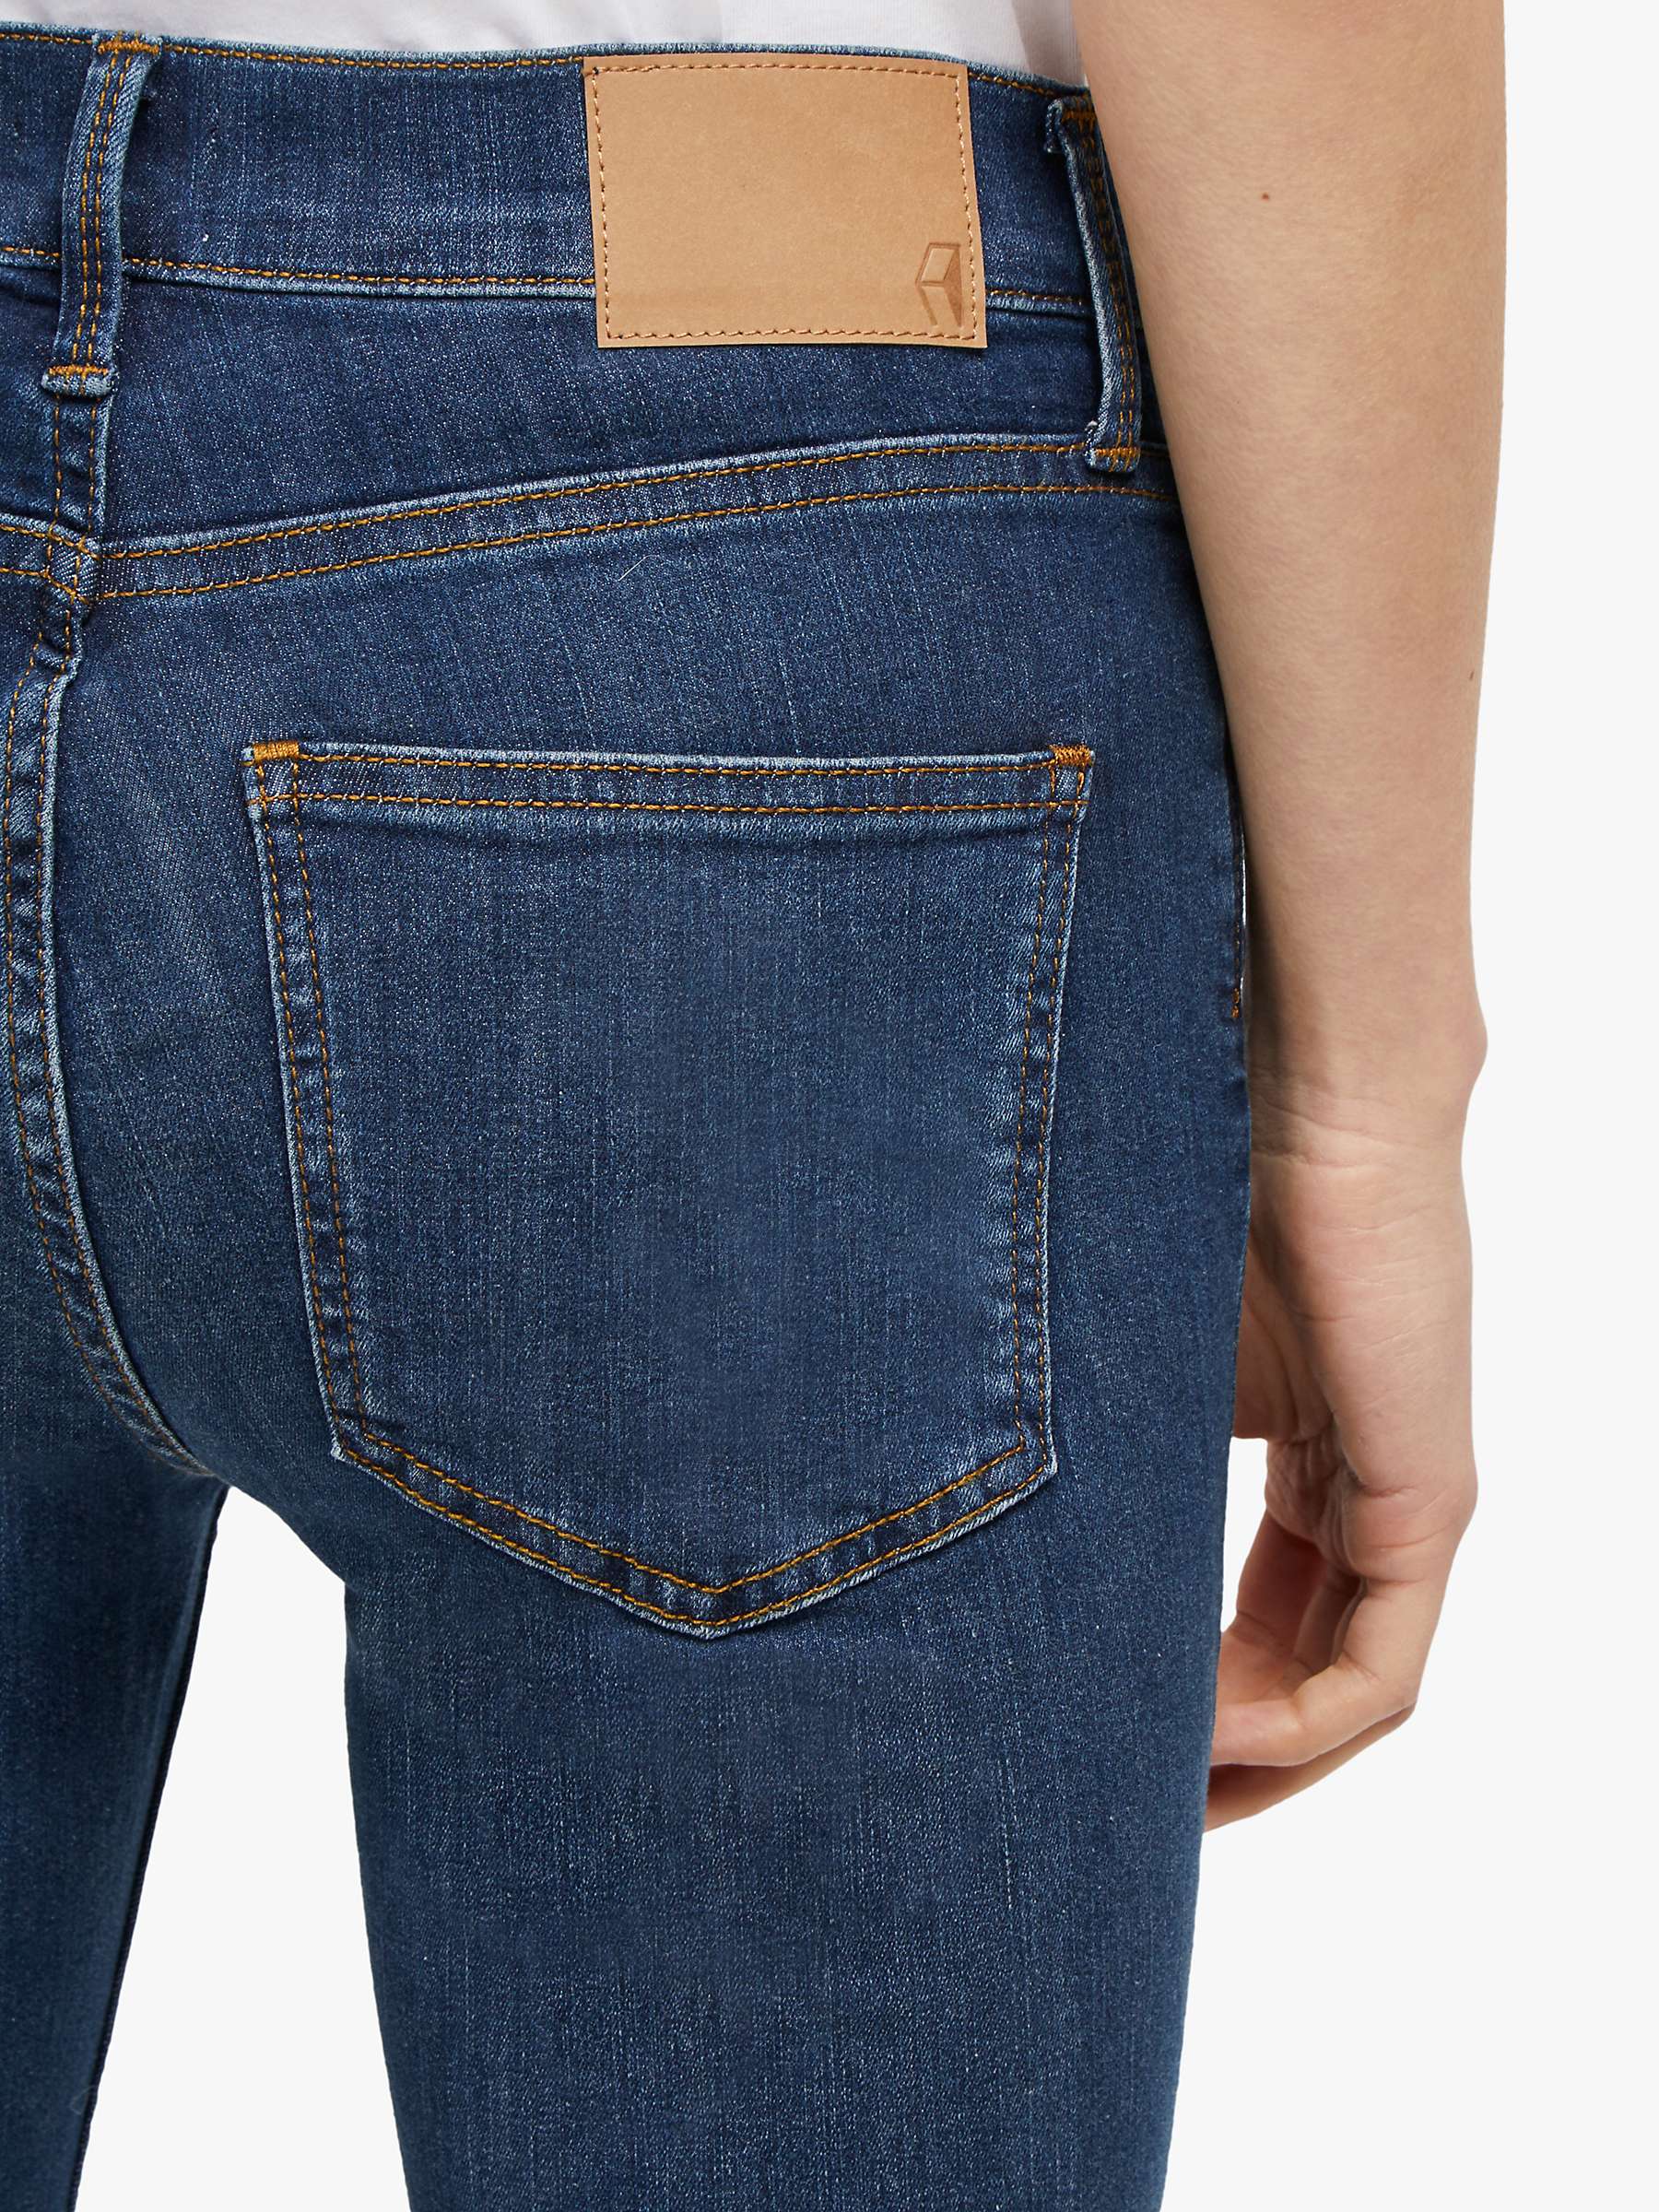 Buy French Connection Mid Rise Skinny Rebound Jeans Online at johnlewis.com